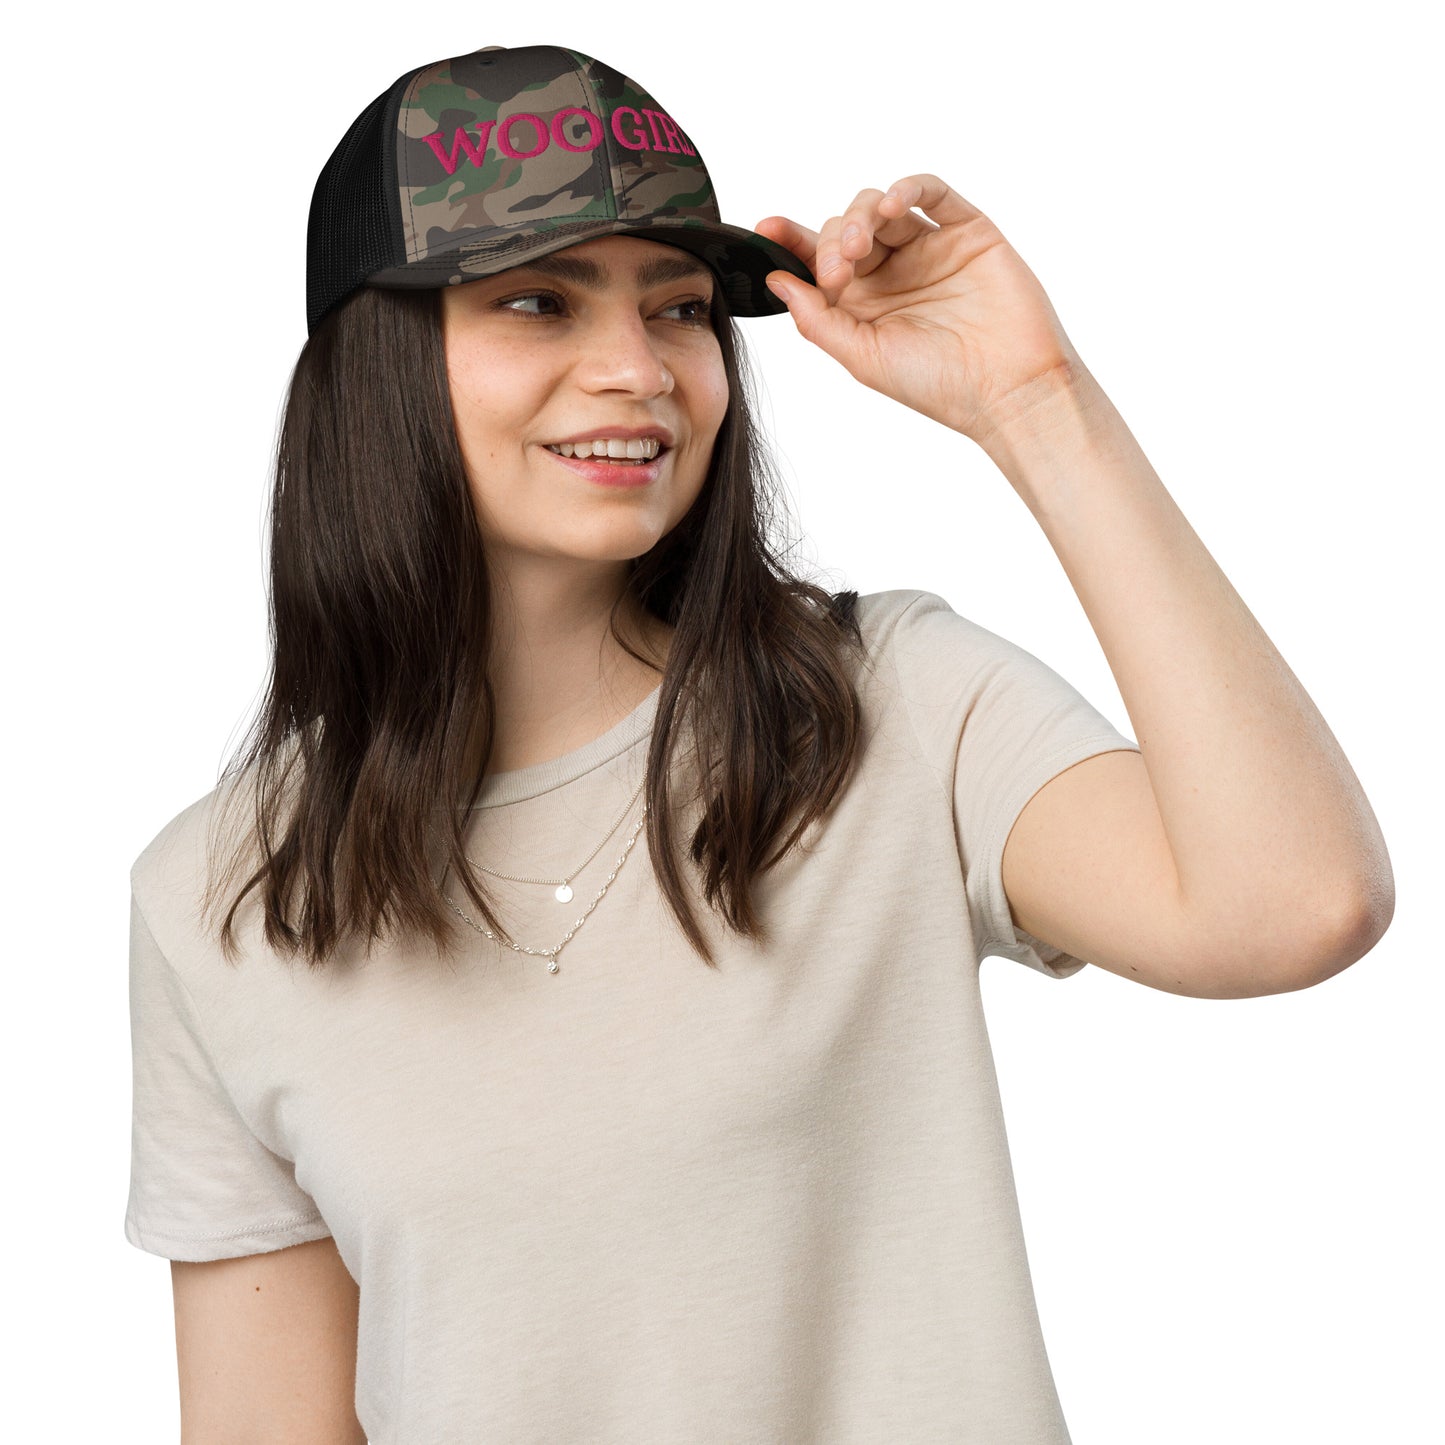 WOO GIRL Camouflage Trucker Hat (pink lettering)